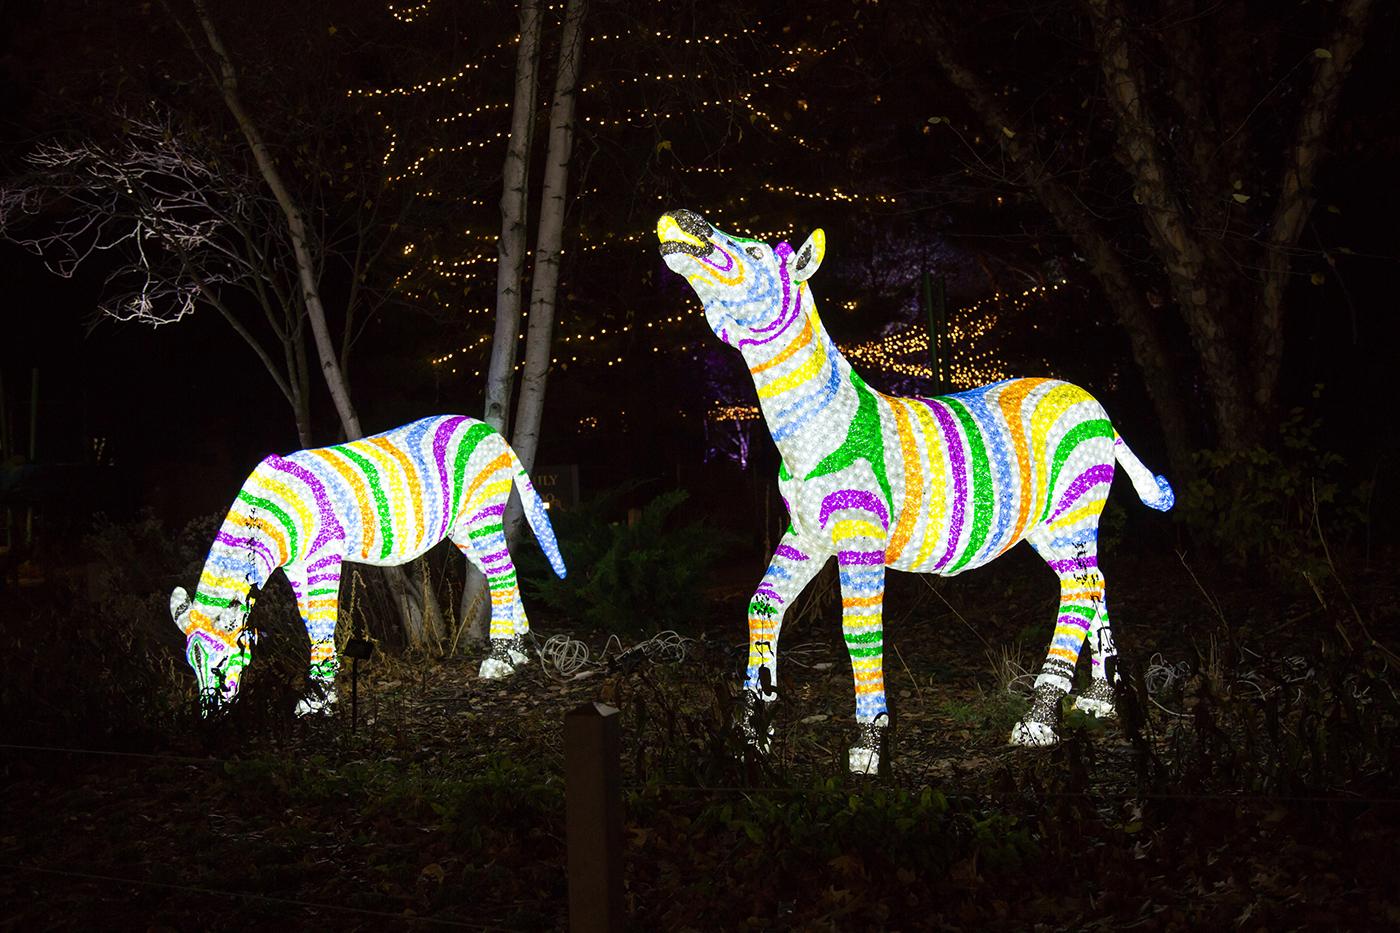 Lincoln Park ZooLights and Its More Than Two Million Lights Are Back